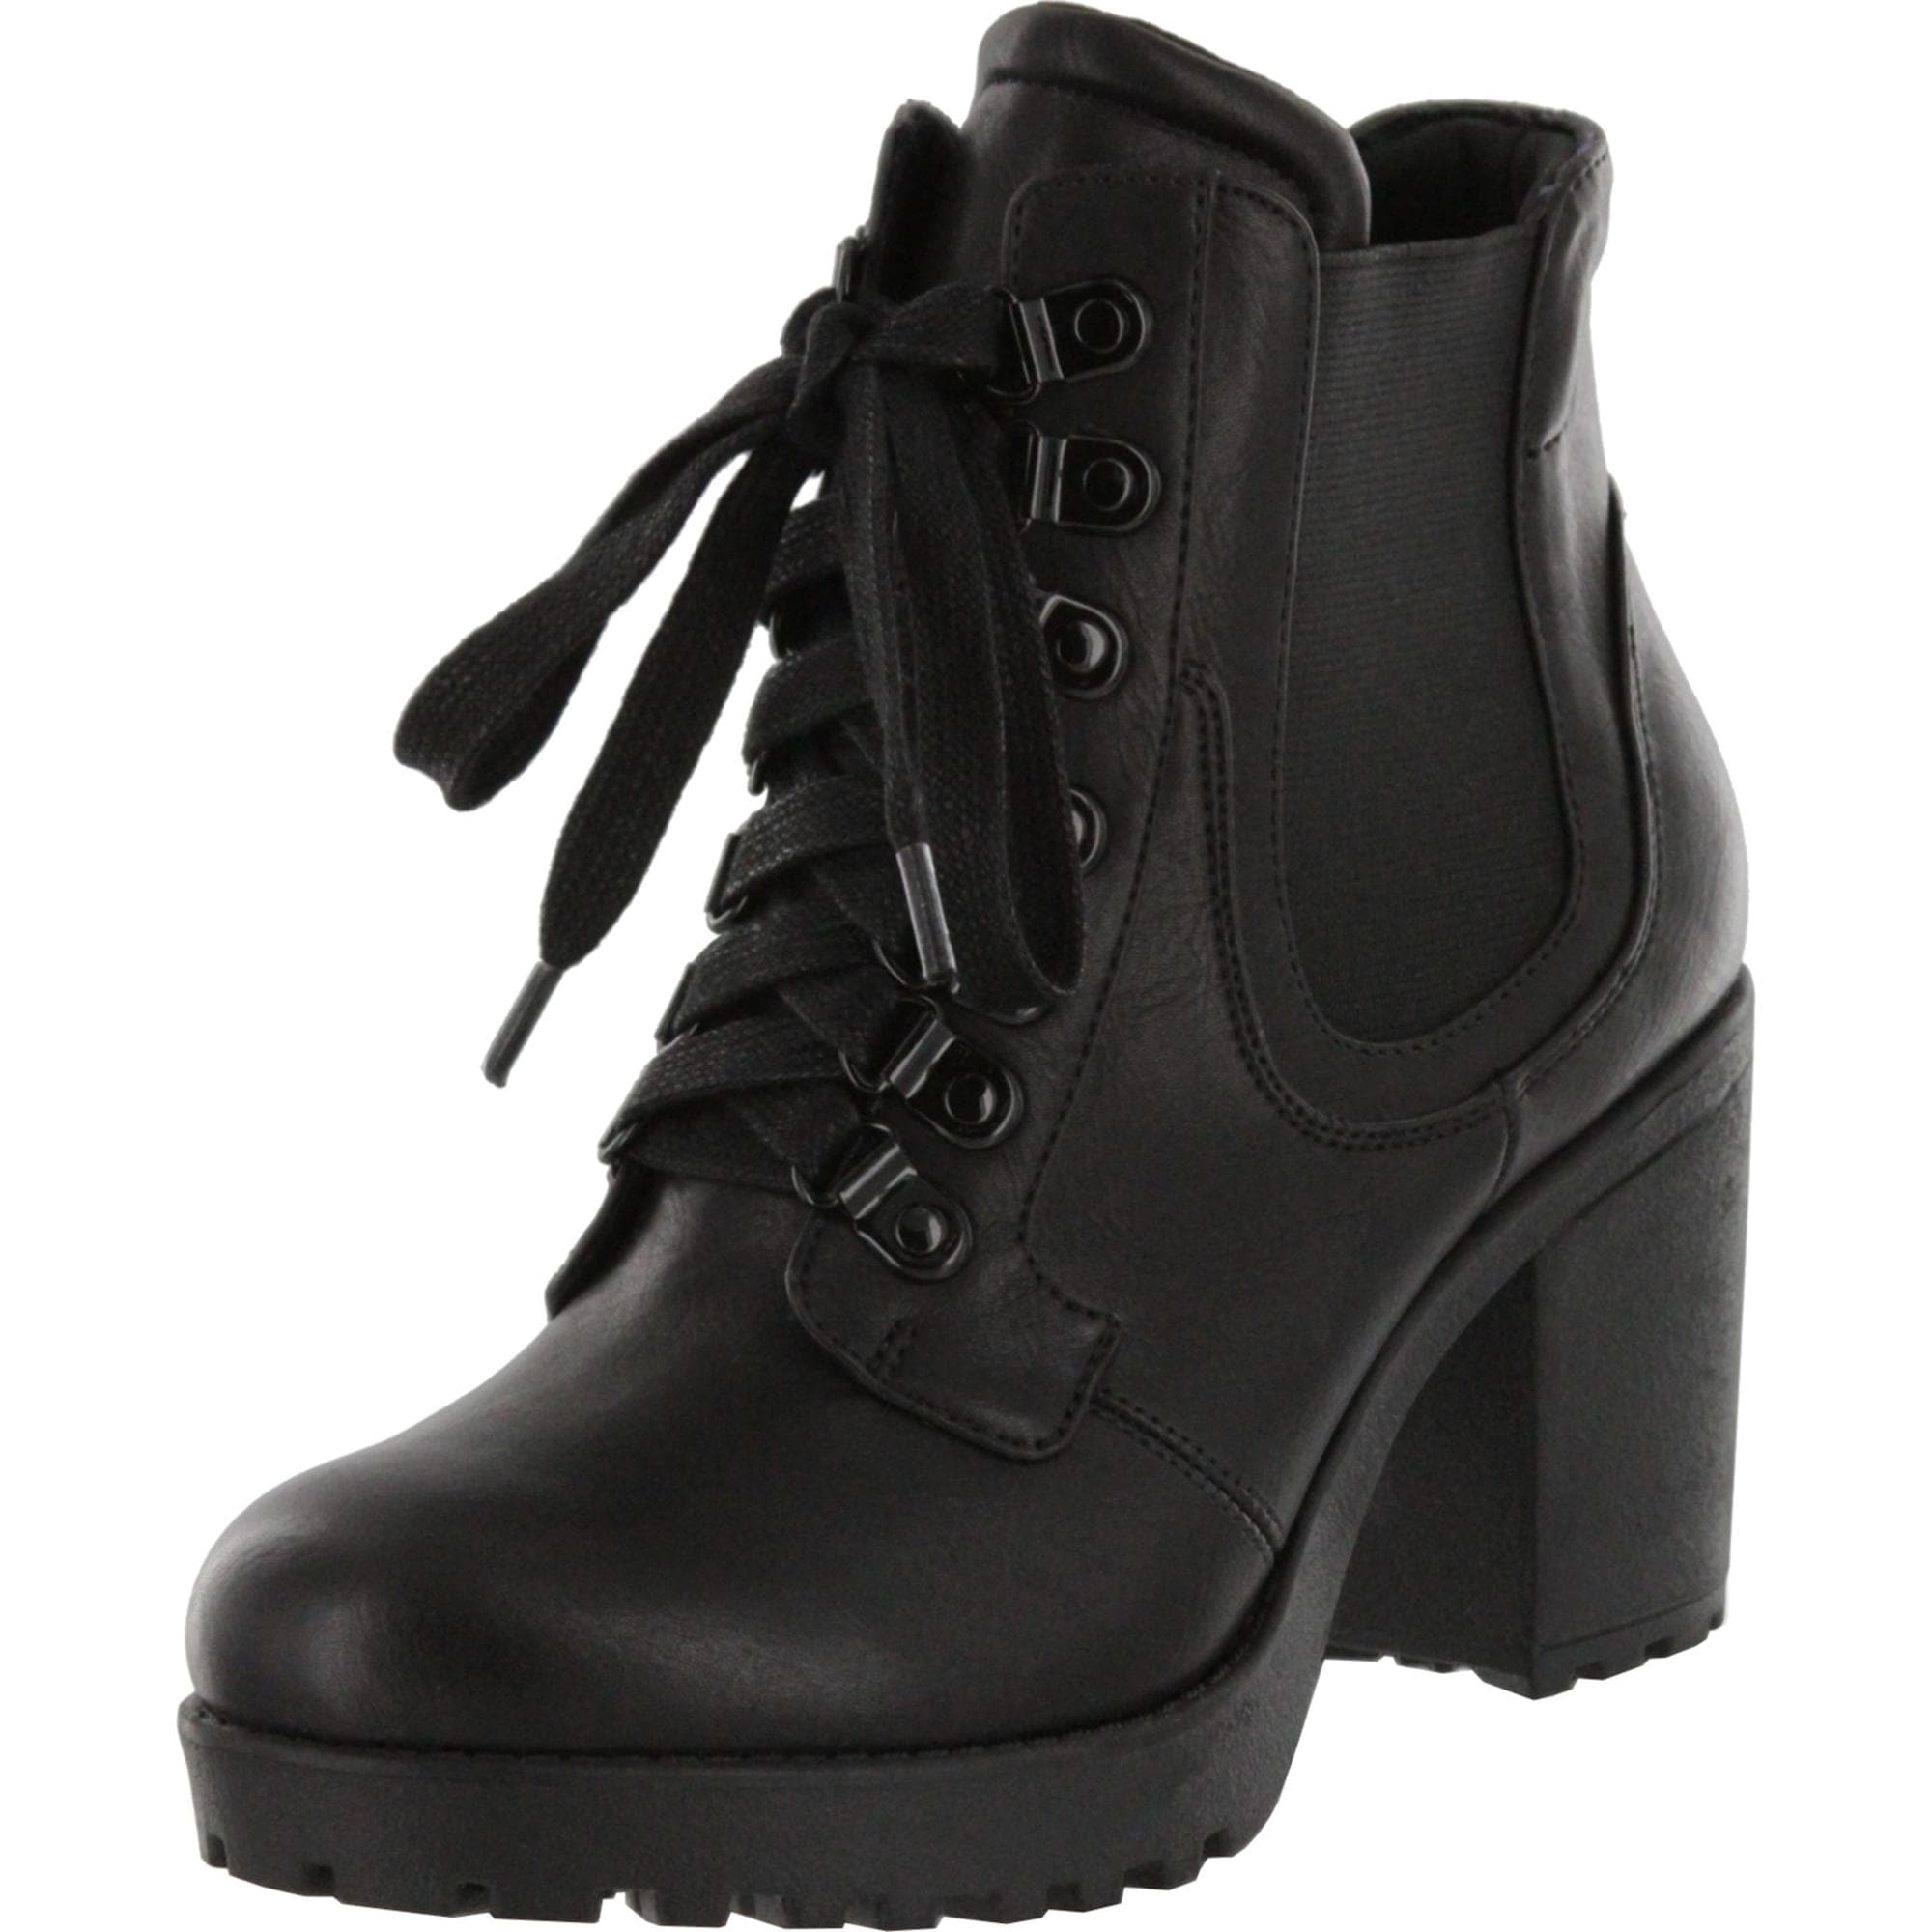 block lace up boots